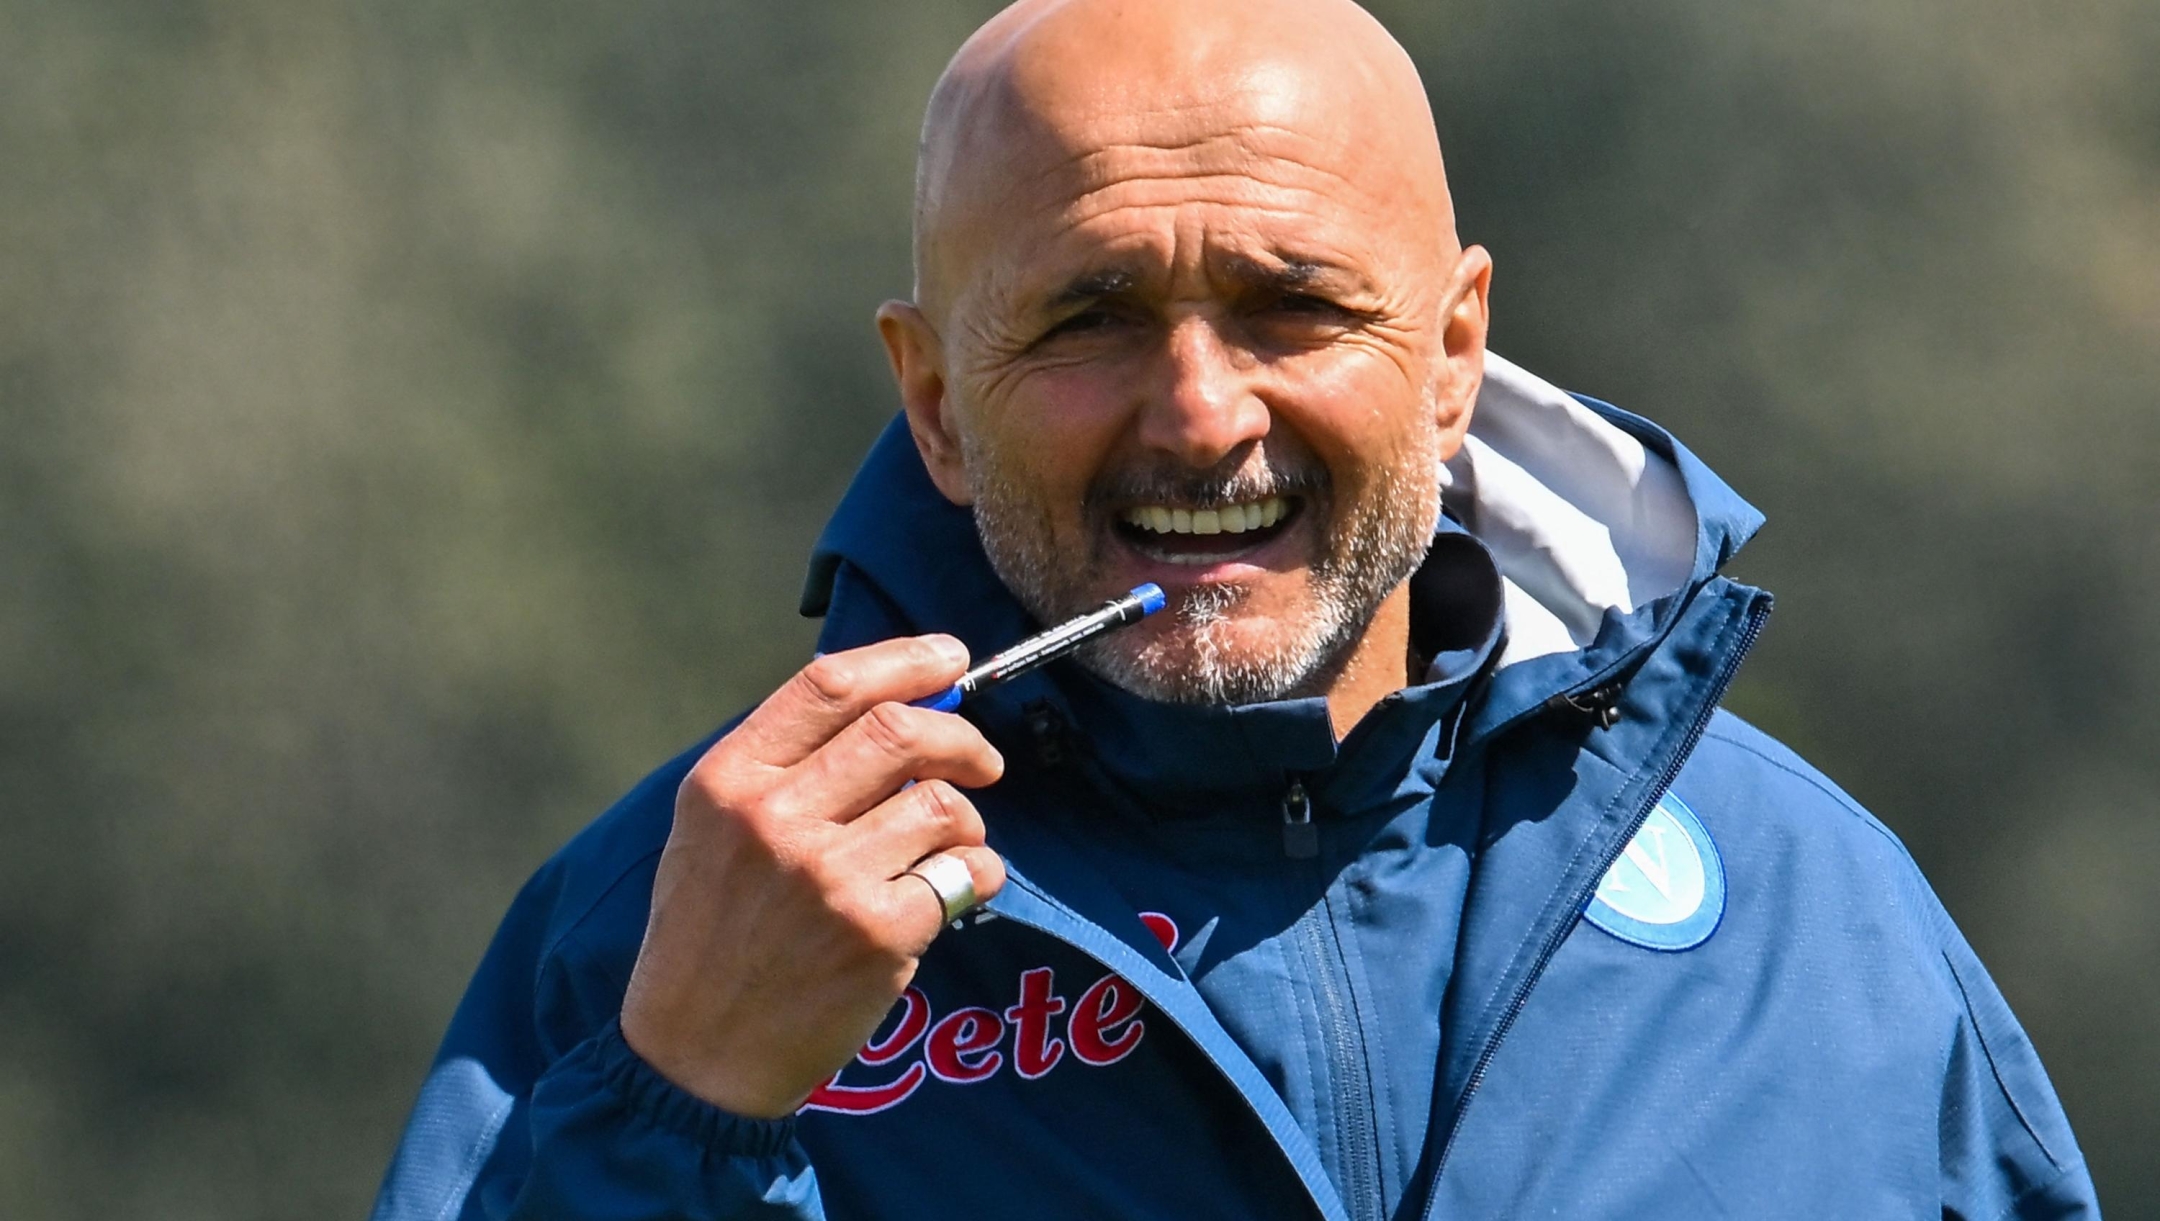 Napoli's Italian coach Luciano Spalletti supervises a training session on April 11, 2023 at the club's training center in Castel Volturno, northwest of Naples, on the eve of the UEFA Champions League quarterfinal first leg football match between AC Milan and SSC Napoli. (Photo by Filippo MONTEFORTE / AFP)